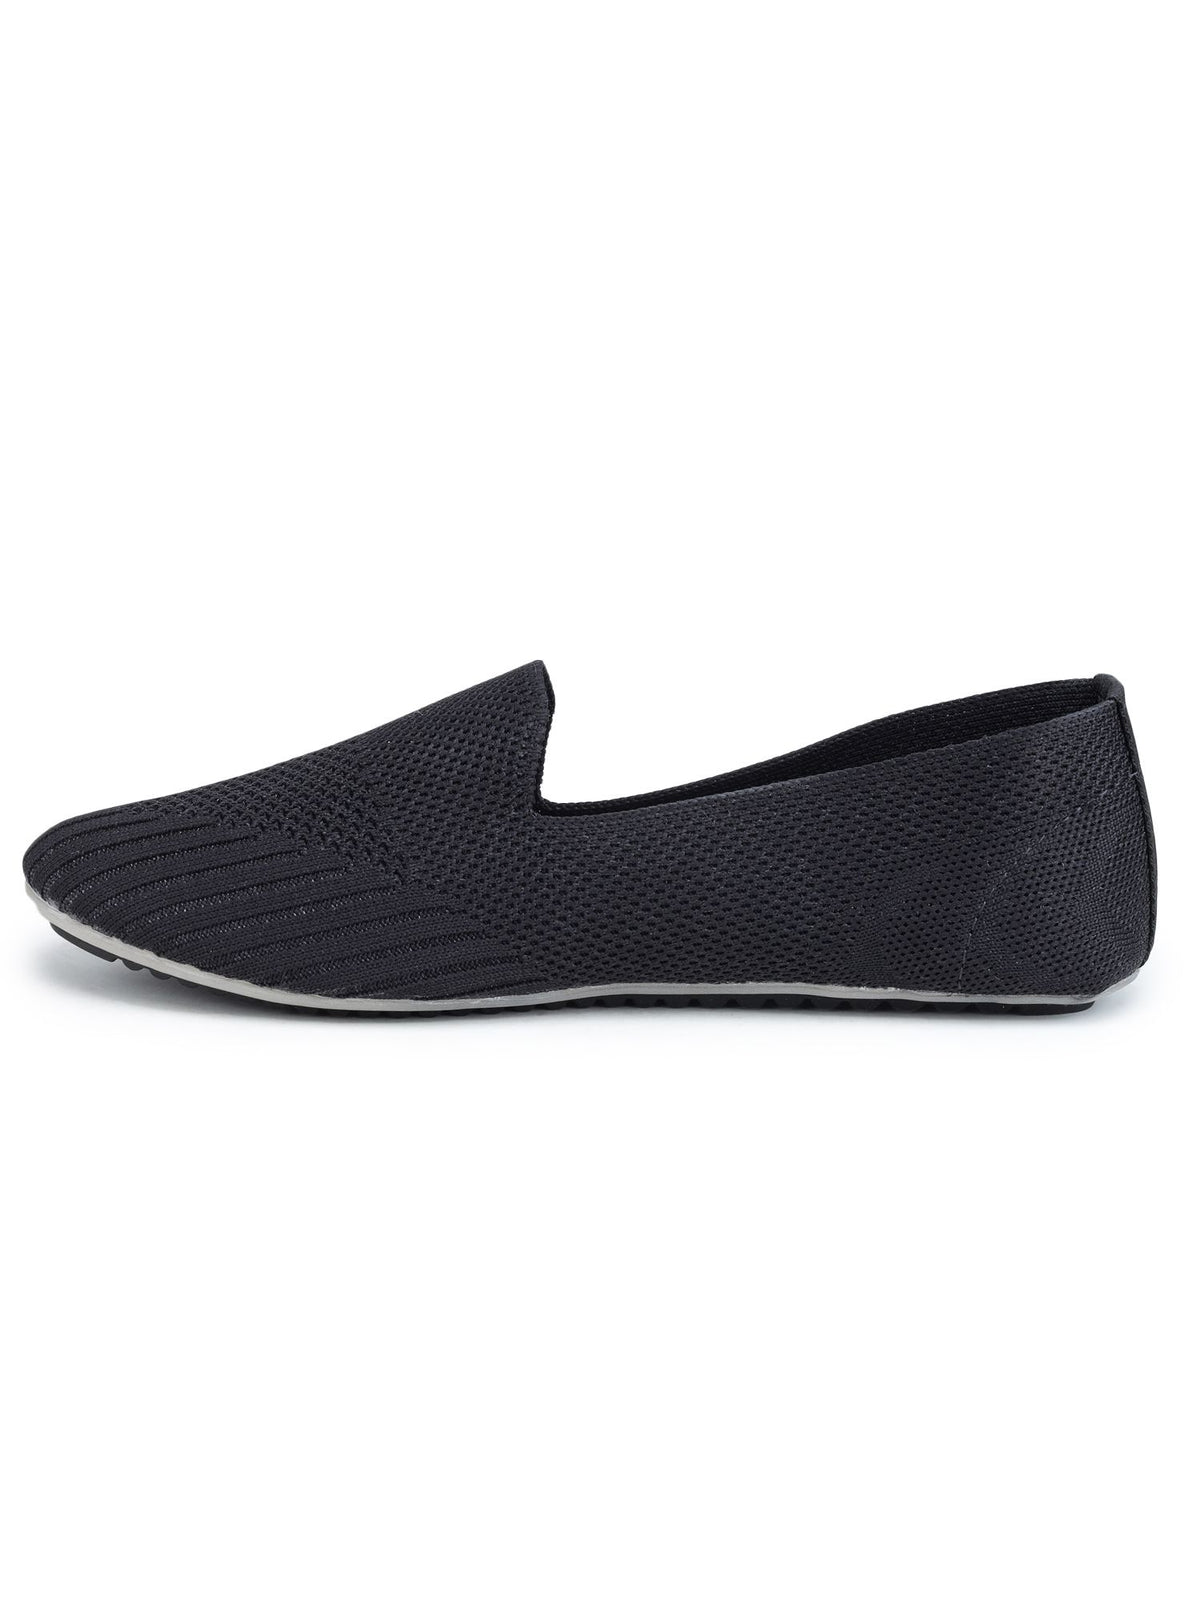 Black Solid Textile Slip On Casual Bellies for Women